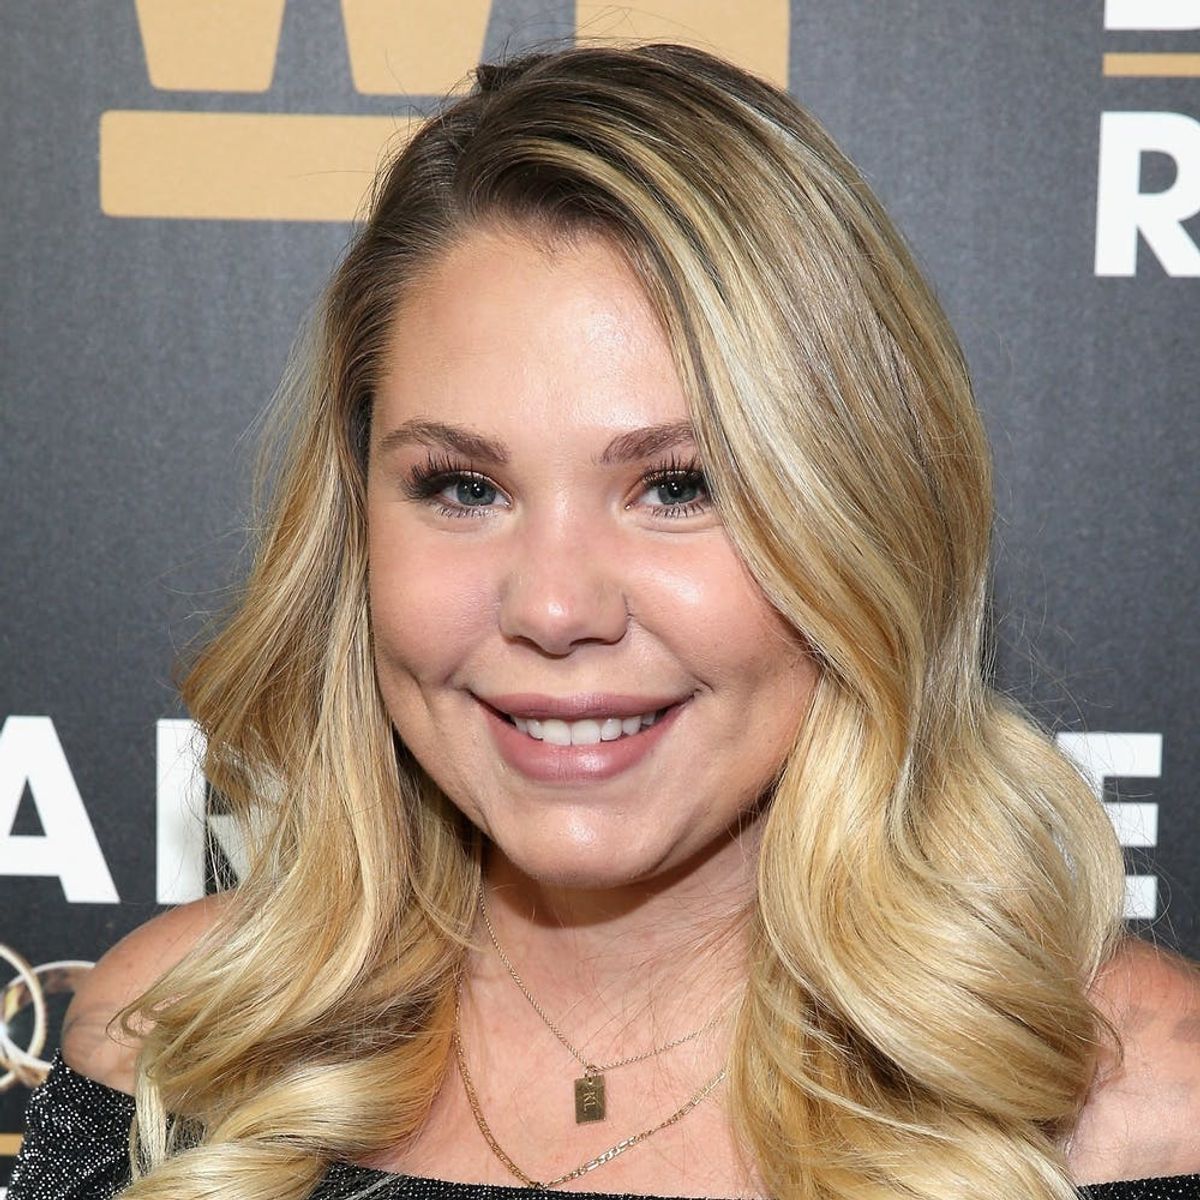 “Teen Mom 2” Star Kailyn Lowry Says She’s Dating a Woman and “So Far, So Good”